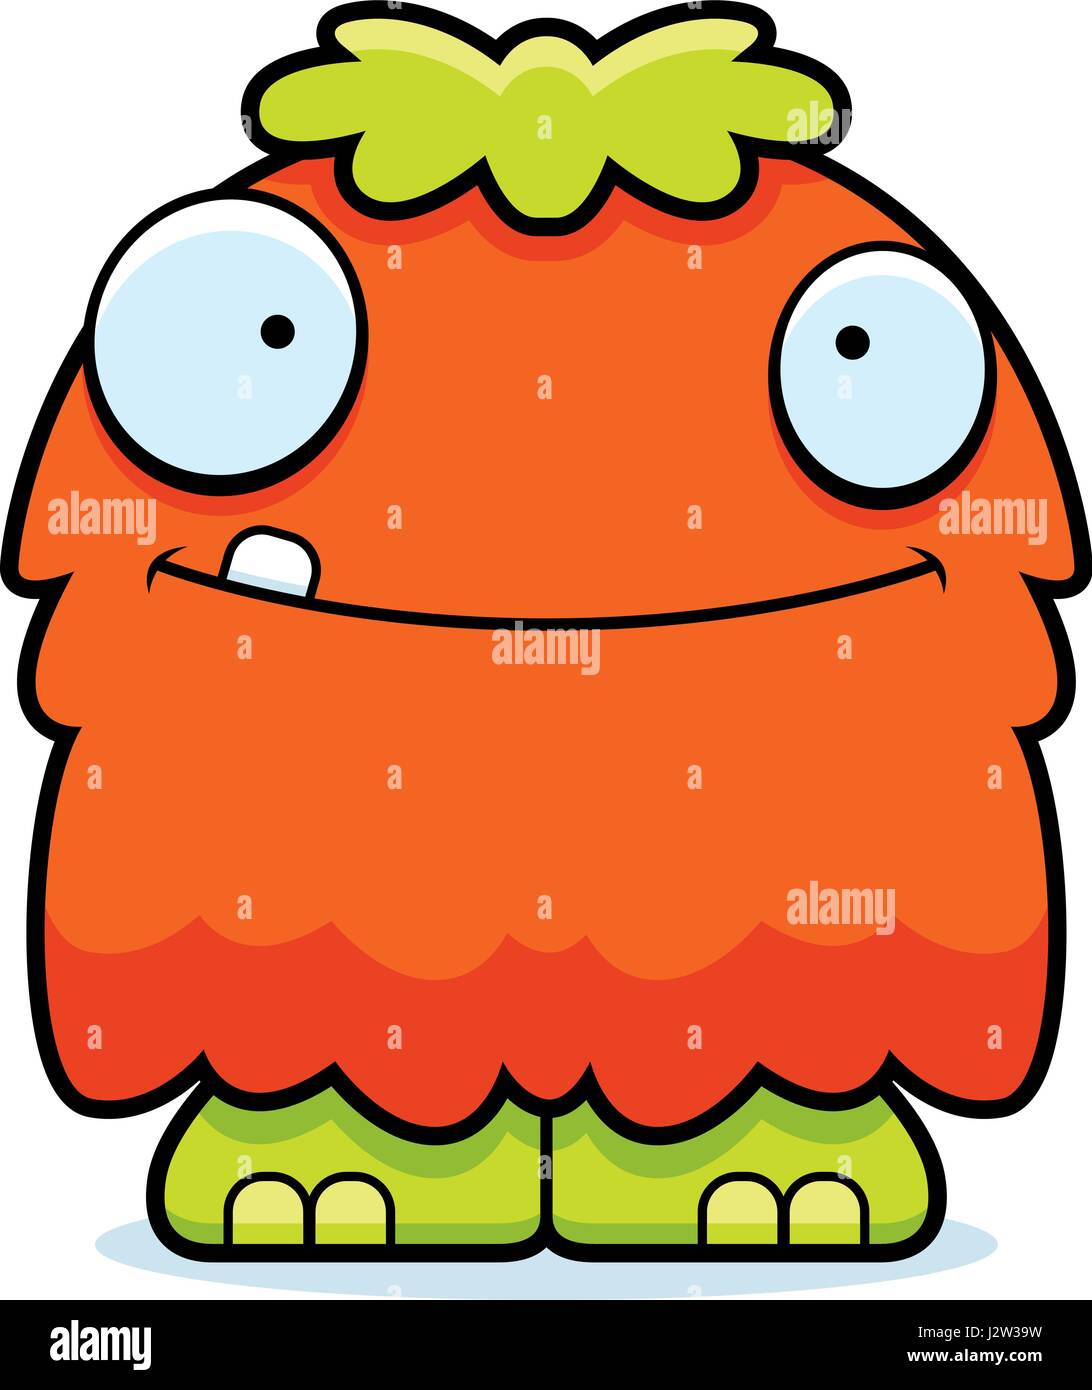 A cartoon illustration of a fluffy monster looking happy. Stock Vector